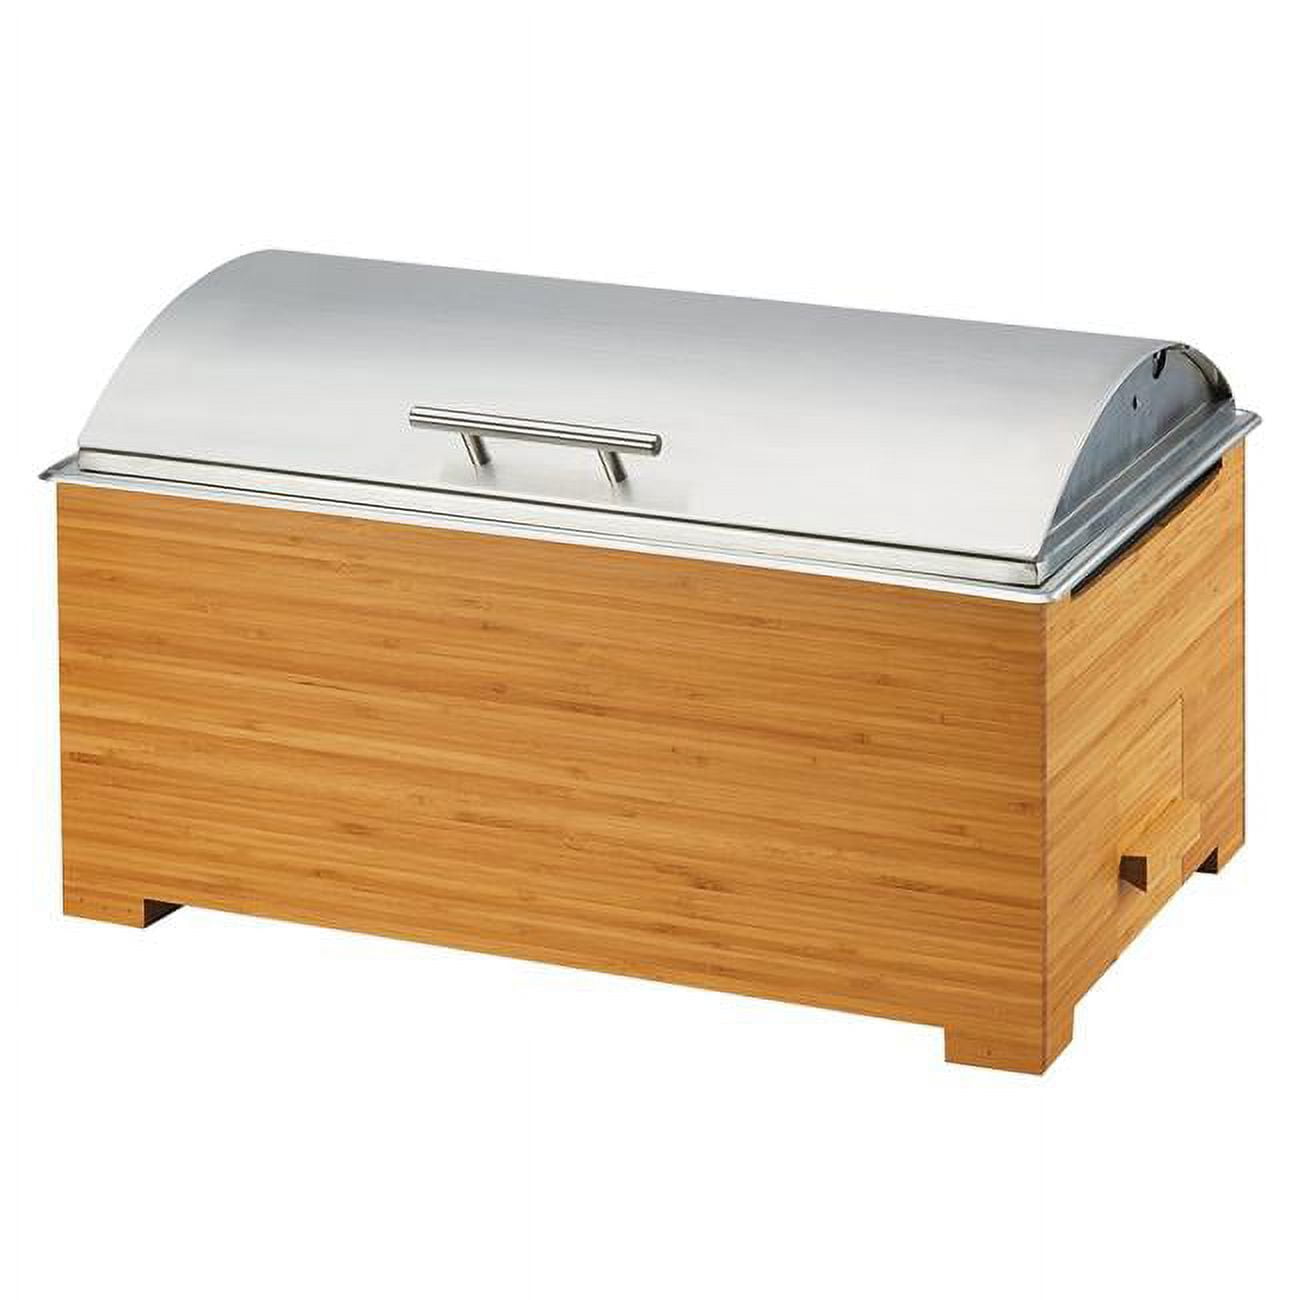 3821-60 Bamboo Full Size Chafer With Lid - 22x14 X 13 In.